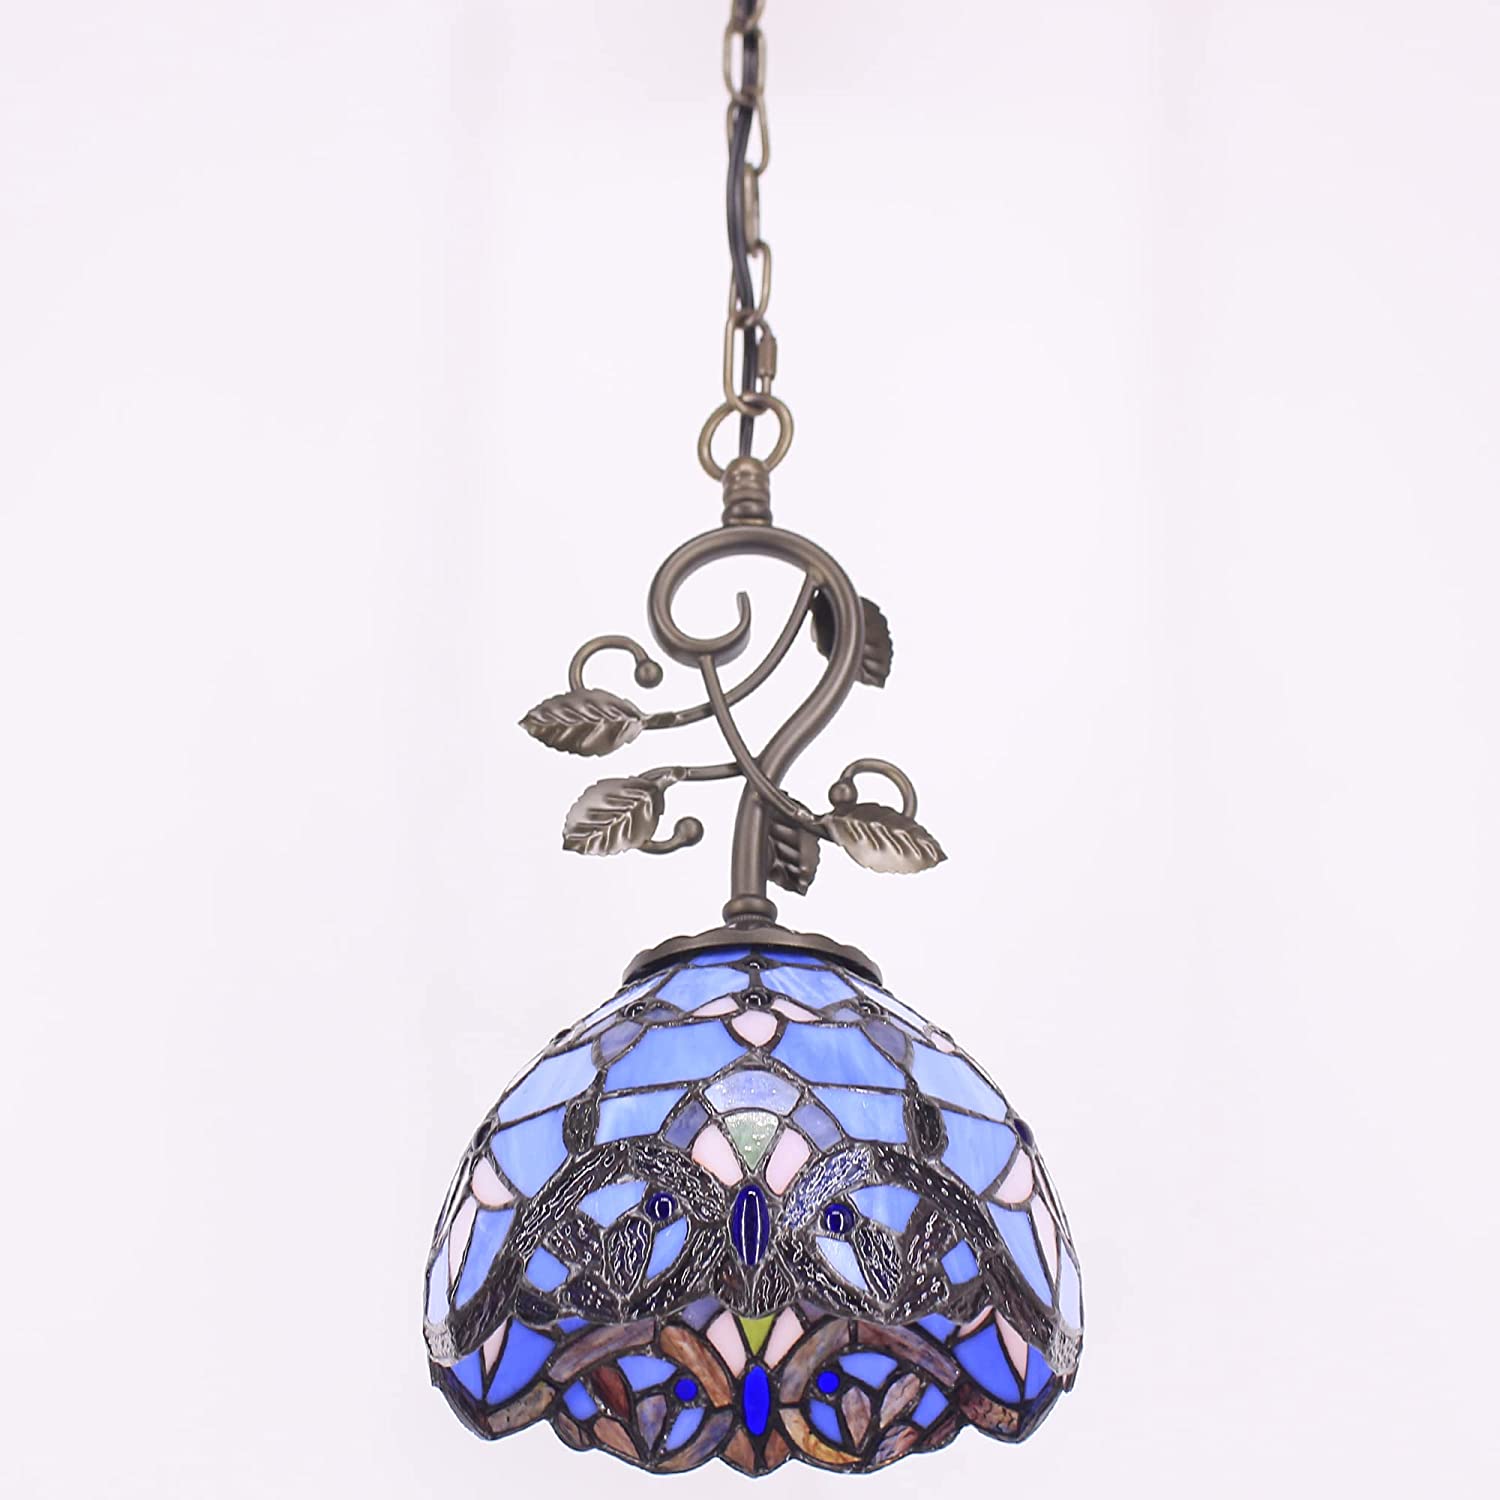 Werfactory®Tiffany Pendant Lighting Purple Stained Glass Baroque Style Hanging Lamp